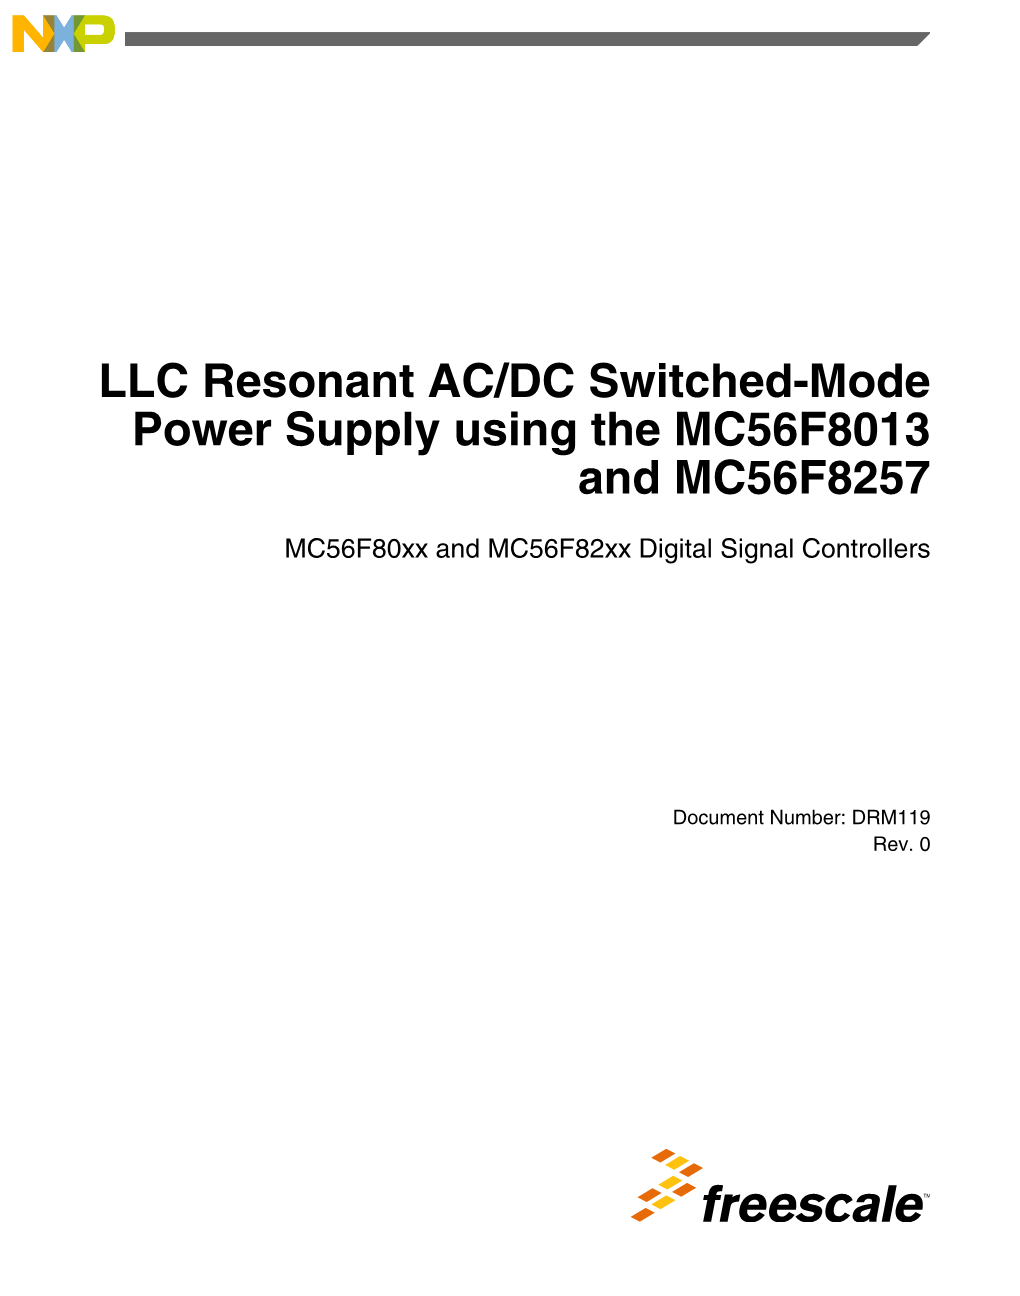 DRM119, LLC Resonant AC/DC Switched-Mode Power Supply